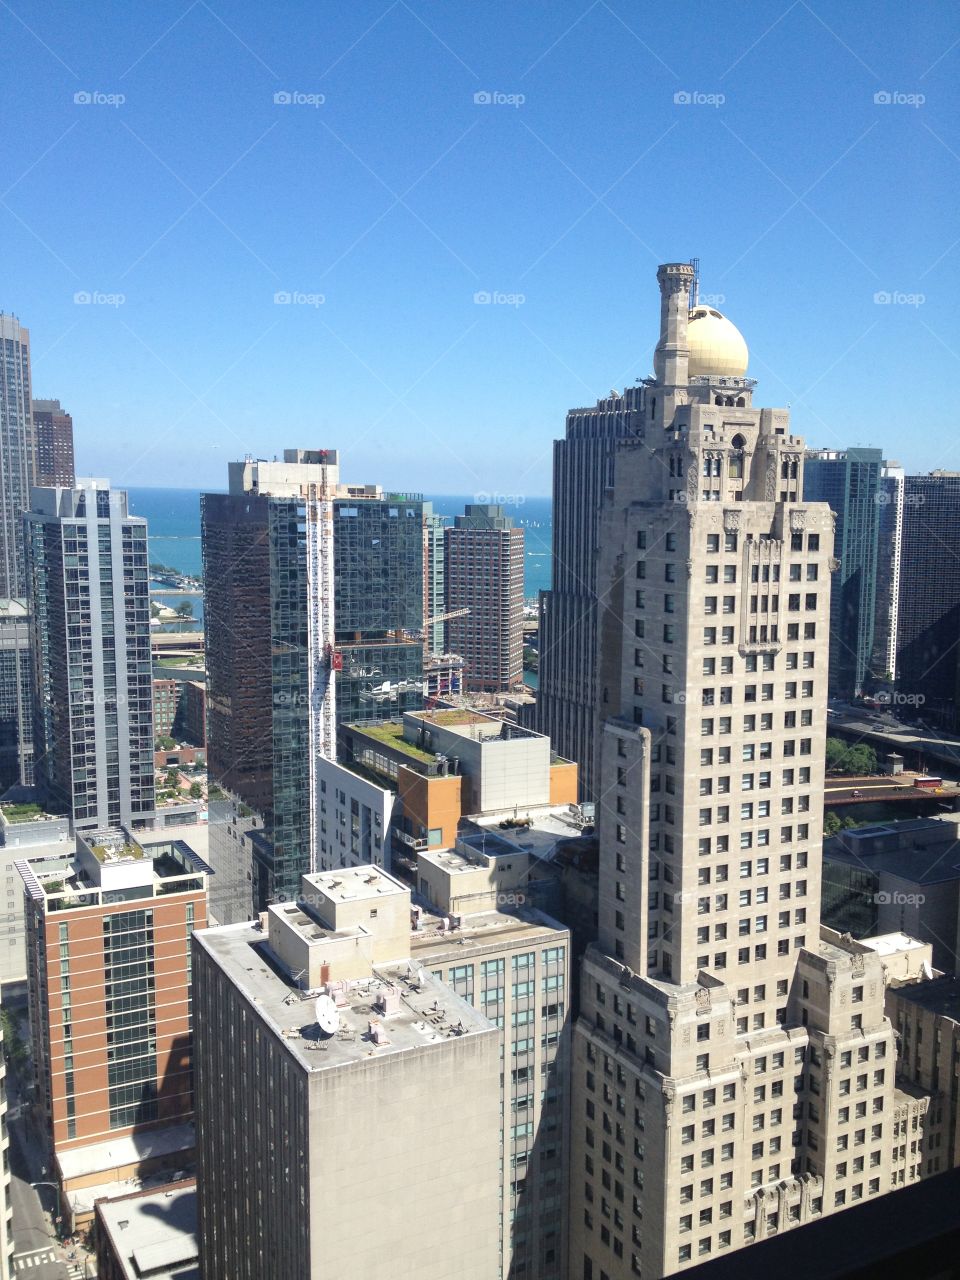 Our View Toward Lake Michigan from Our the Governors Suite At the Marriott in Chicago